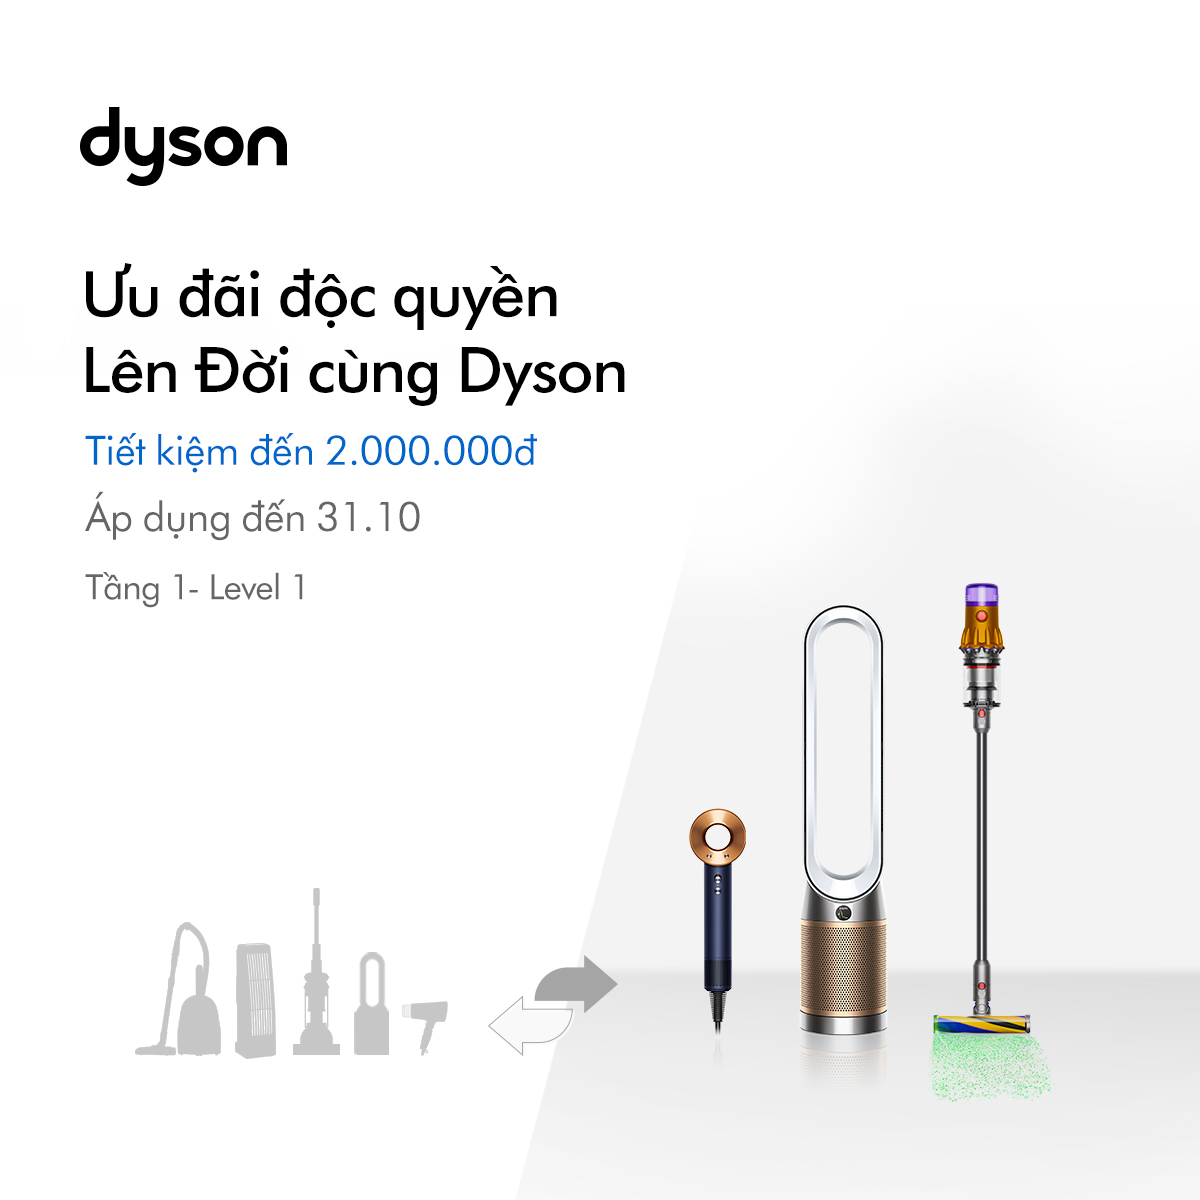 🔥UPGRADE WITH DYSON - GIFT SAVING UP TO VND 2,000,000🔥